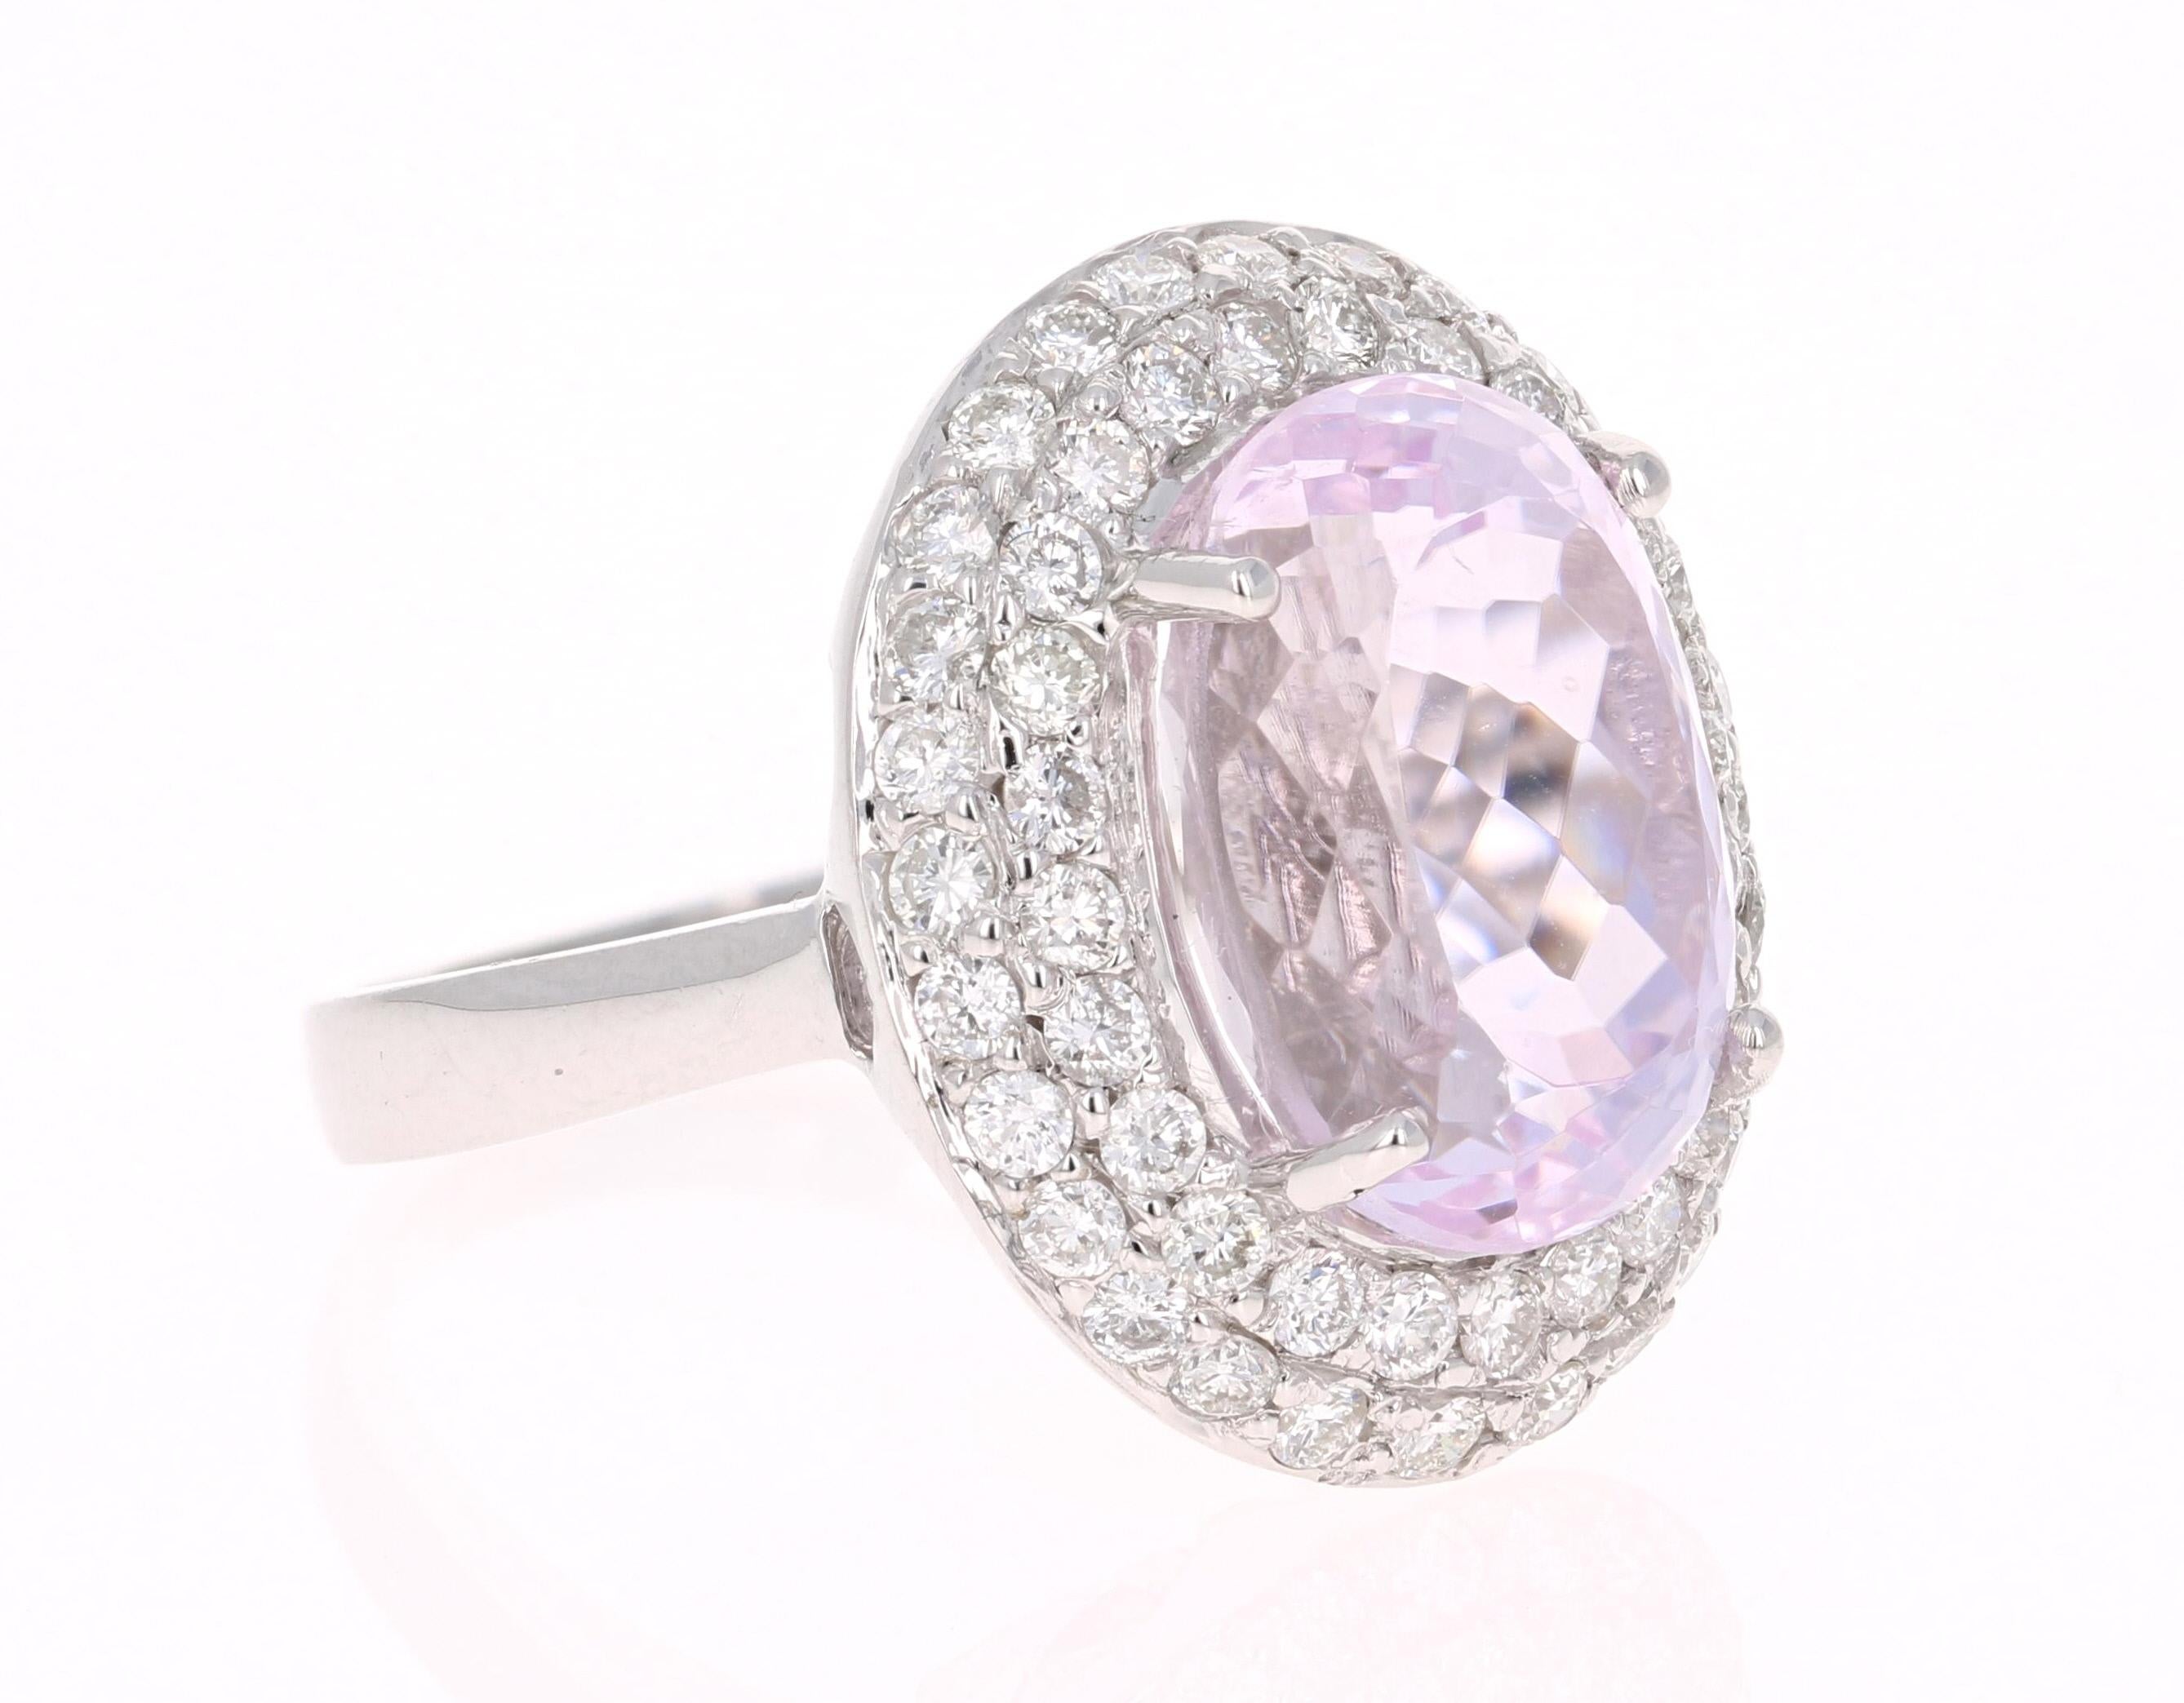 A lovely Engagement Ring Option or as an alternate to a Pink Diamond Ring! This simply stunning Kunzite Diamond Ring has a 10.58 Carat Oval Cut Kunzite as its center and has thick double halo of 55 Round Cut Diamonds that weigh 1.31 carats. The